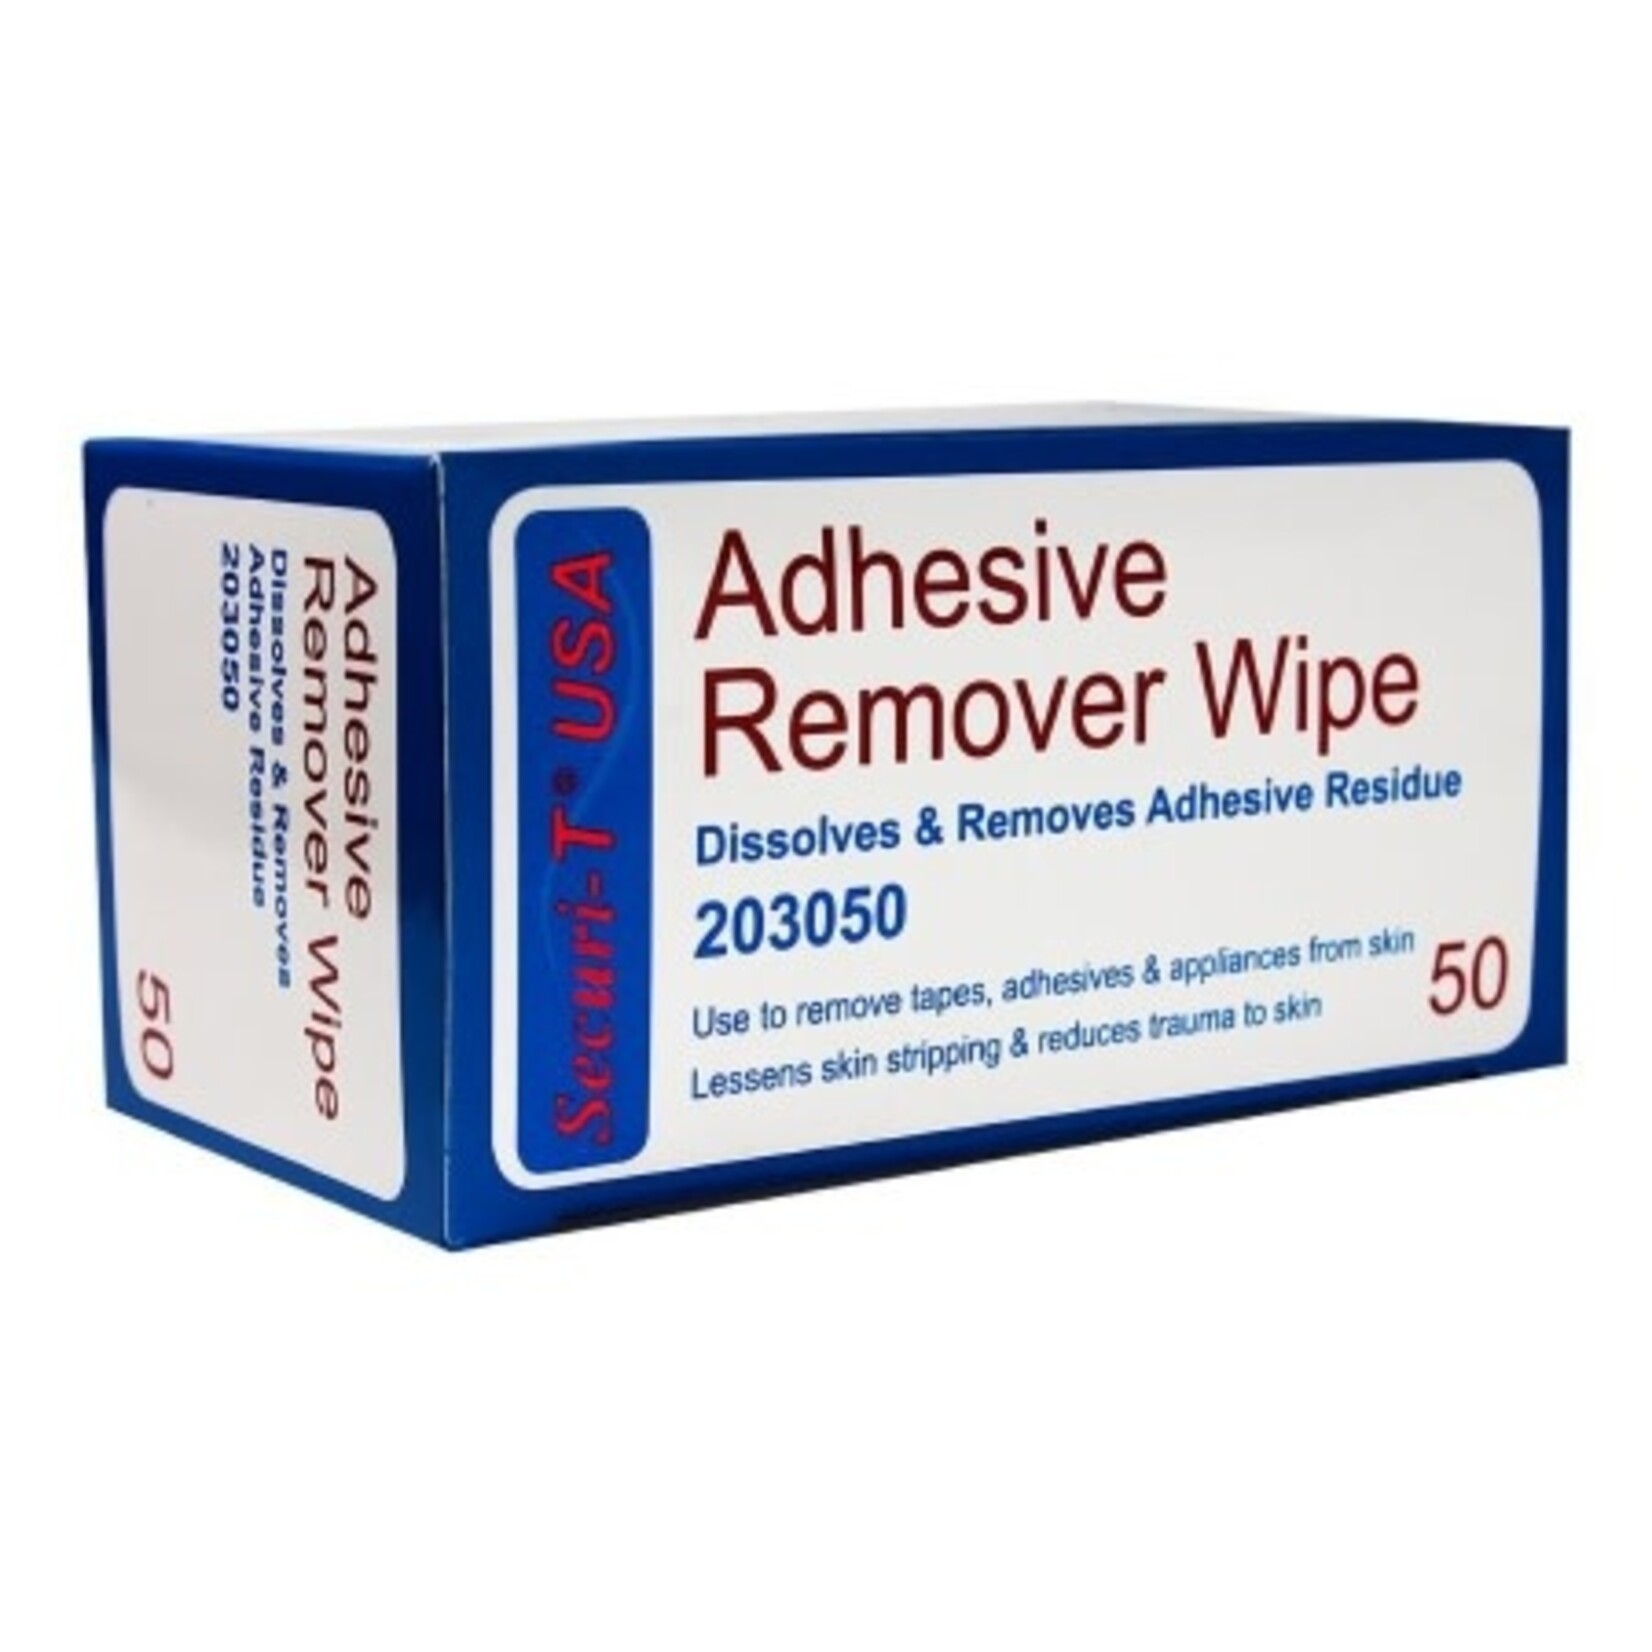 Securi-T USA Adhesive Remover Wipe 1-1/4" x 3” 50/BX